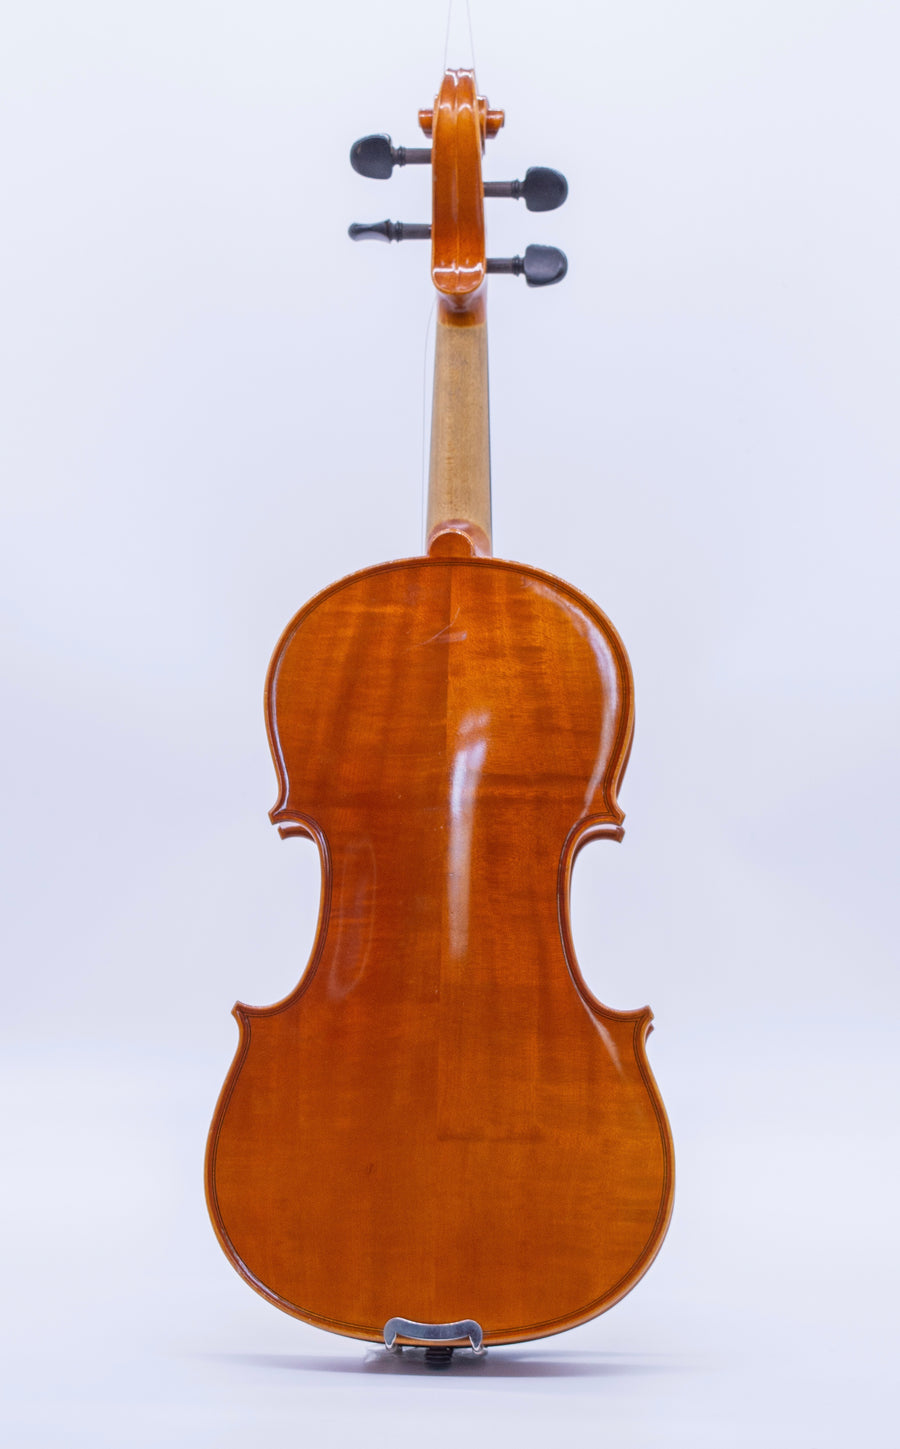 A Strobel 4/4 Student Violin Outfit